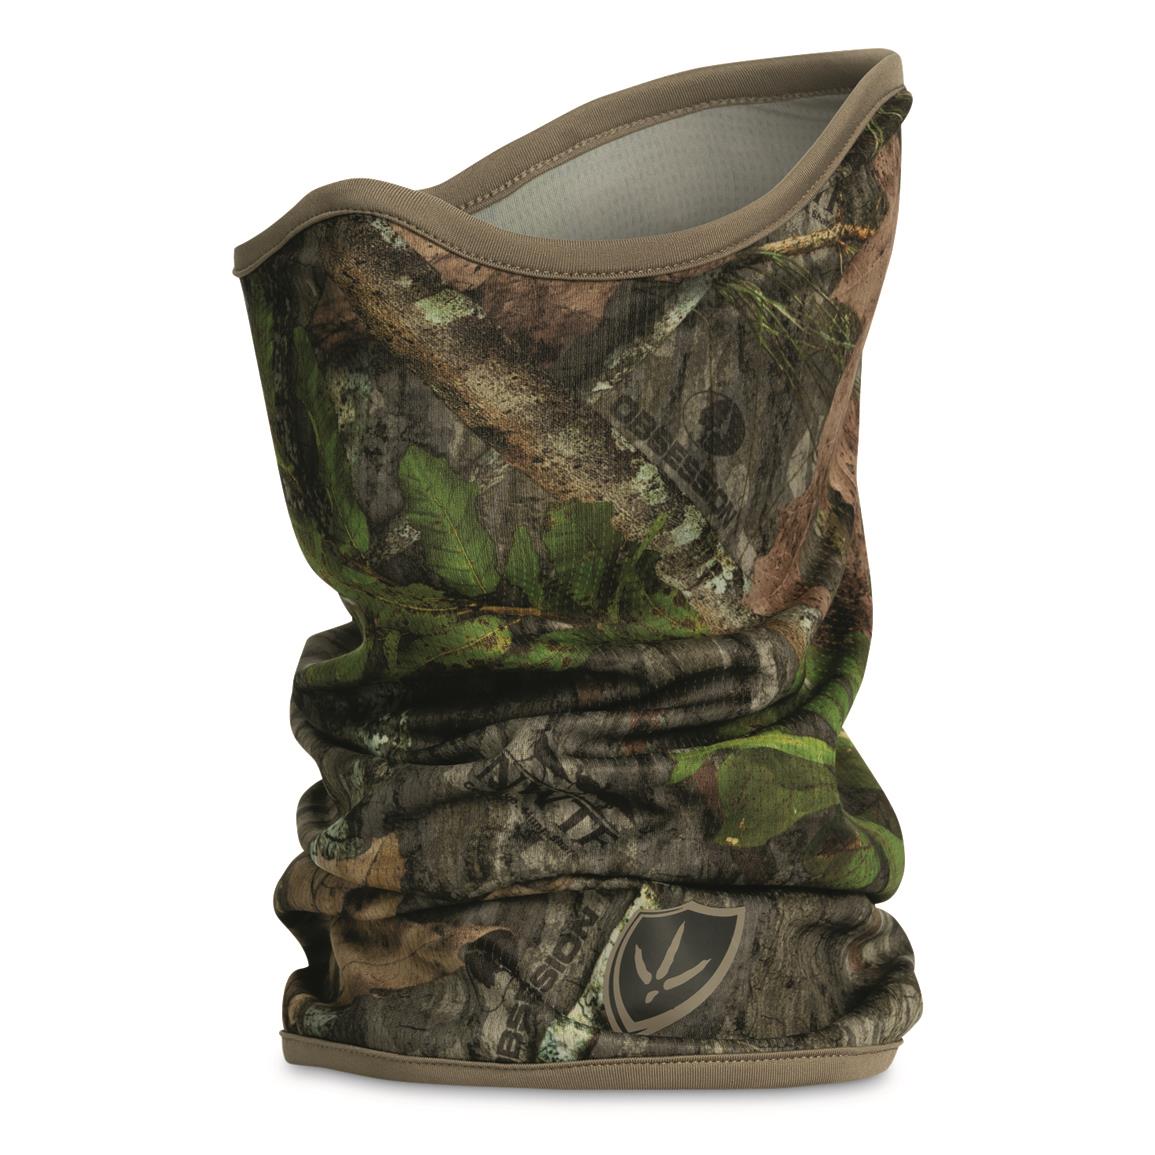 Blocker Outdoors Finisher Turkey Hunting Facemask, Mossy Oak Obsession®